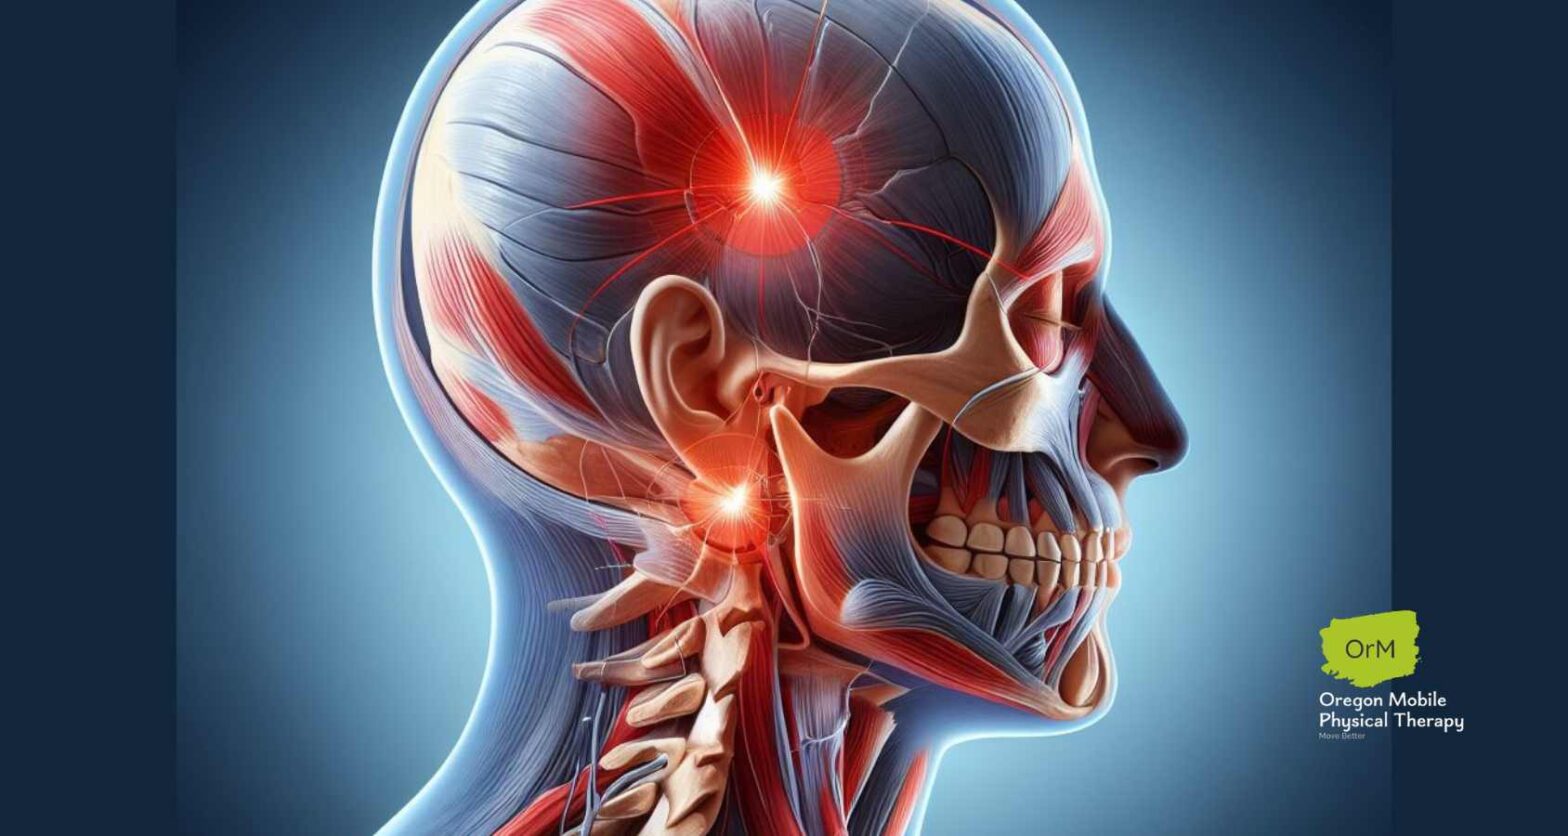 An anatomical illustration of a human head and neck, highlighting the muscles and nervous system. Bright red spots indicate areas of pain or tension, particularly in the temple and jaw regions. The image, ideal for physical therapy education, is labeled with the logo of Oregon Mobile Physical Therapy.